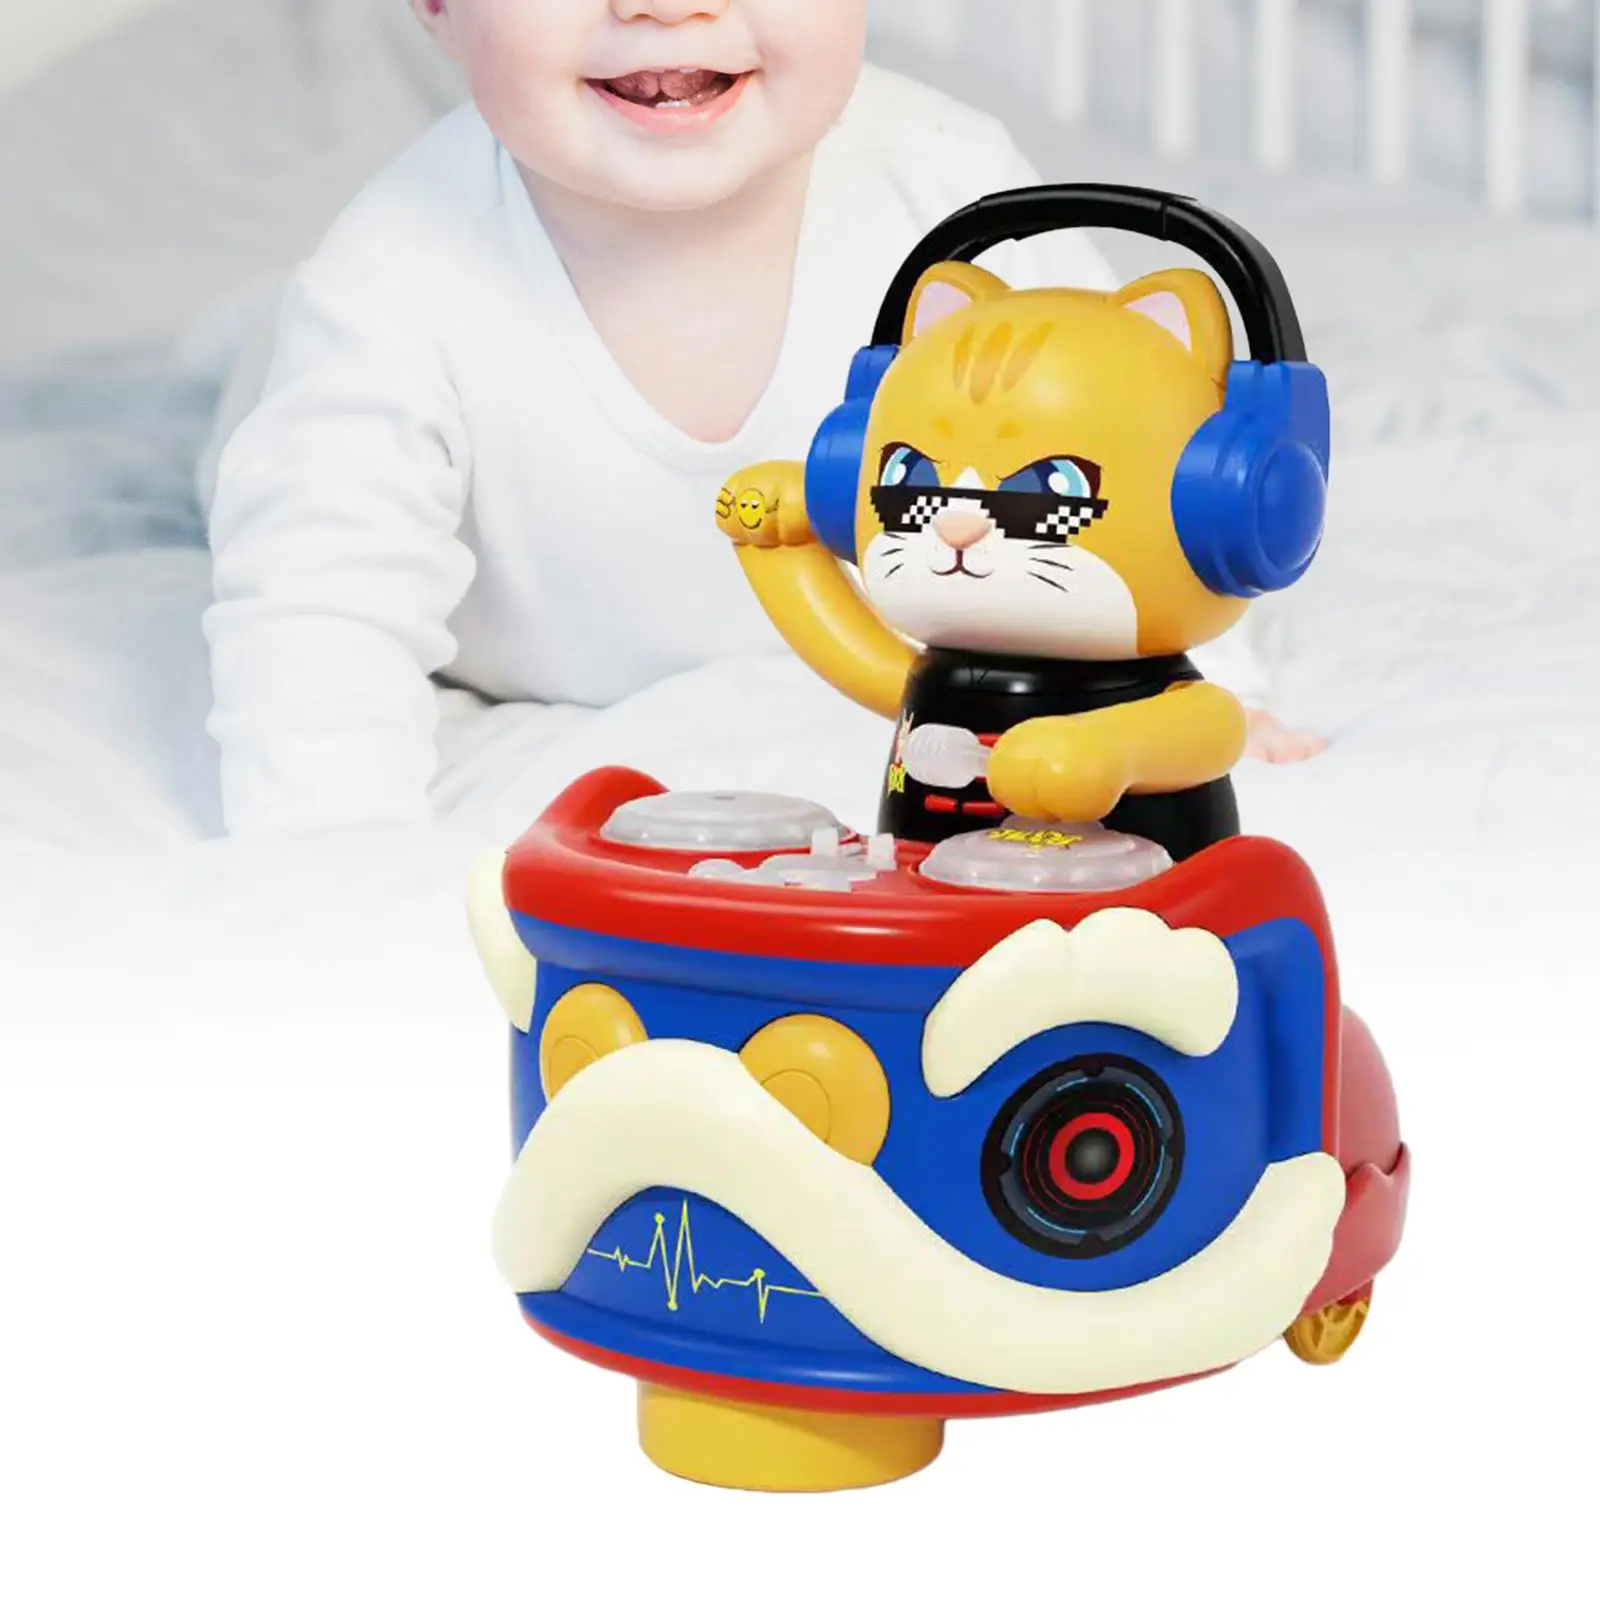 Dancing Cat Walking Toy Baby Toy Electric DJ Disc Cats for Party Supplies Ages 1-3 Years Old Children Travel Toy Leisure Toys